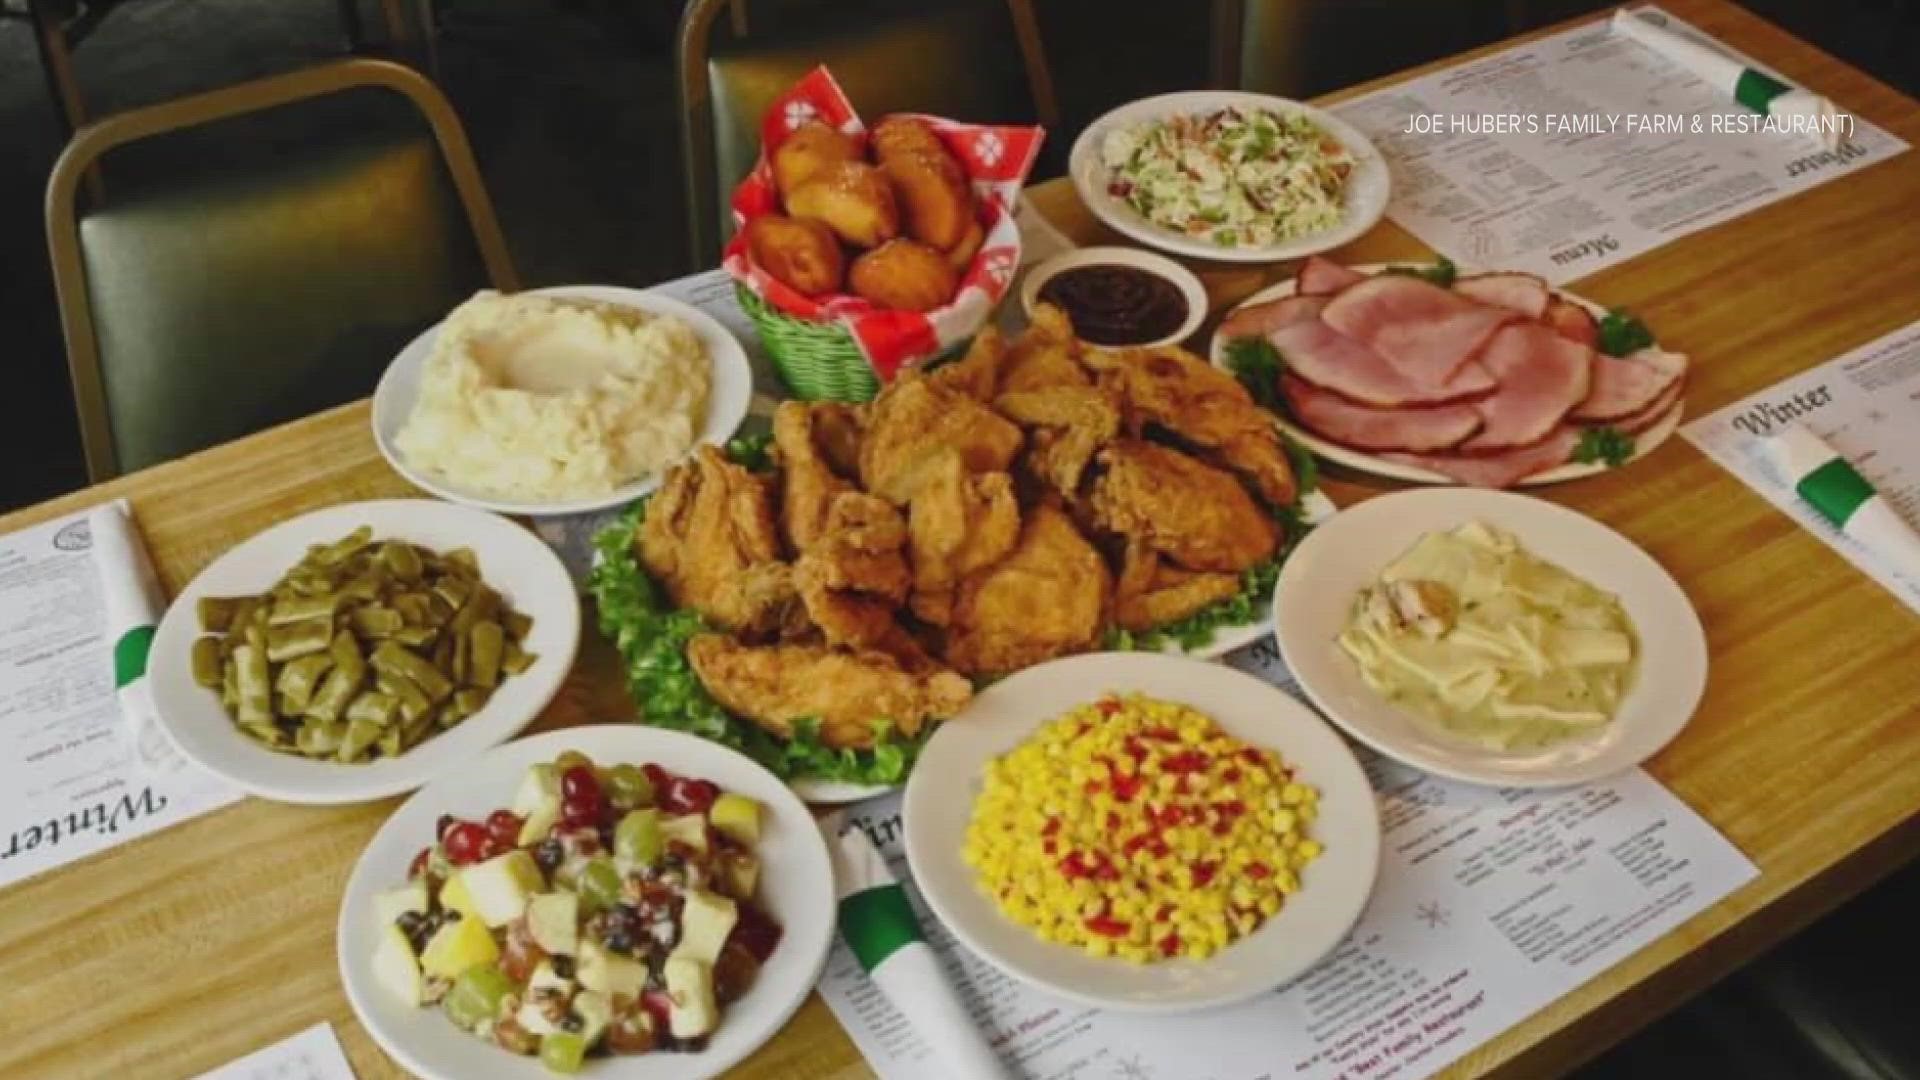 The popular southern Indiana restaurant is bringing back it's original menu with a few new additions.